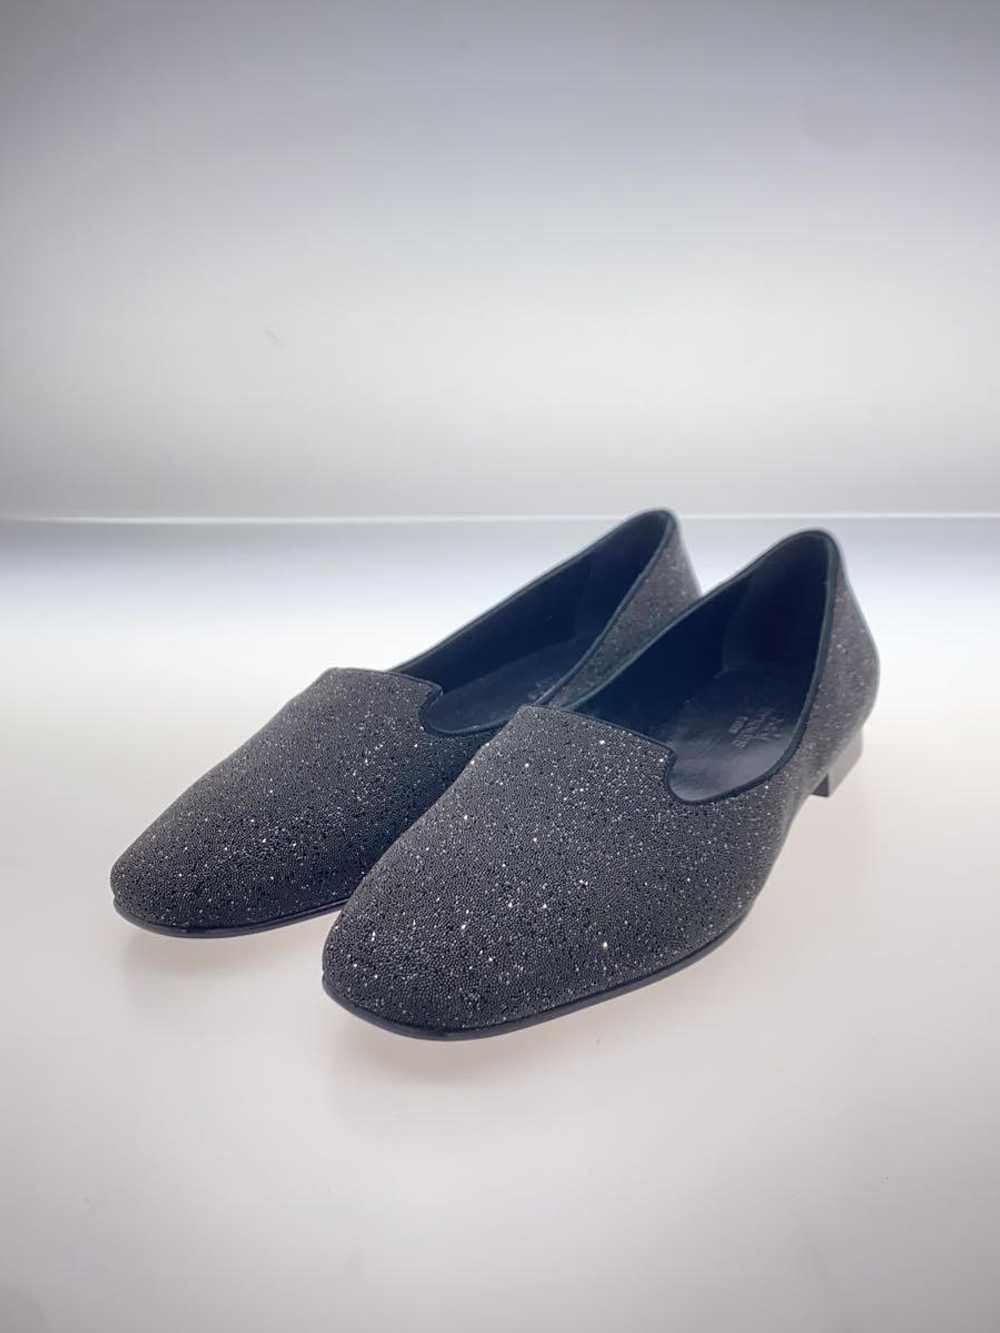 Hermes Flat Shoes/36/Blk/Glitter/ Shoes Bf220 - image 2